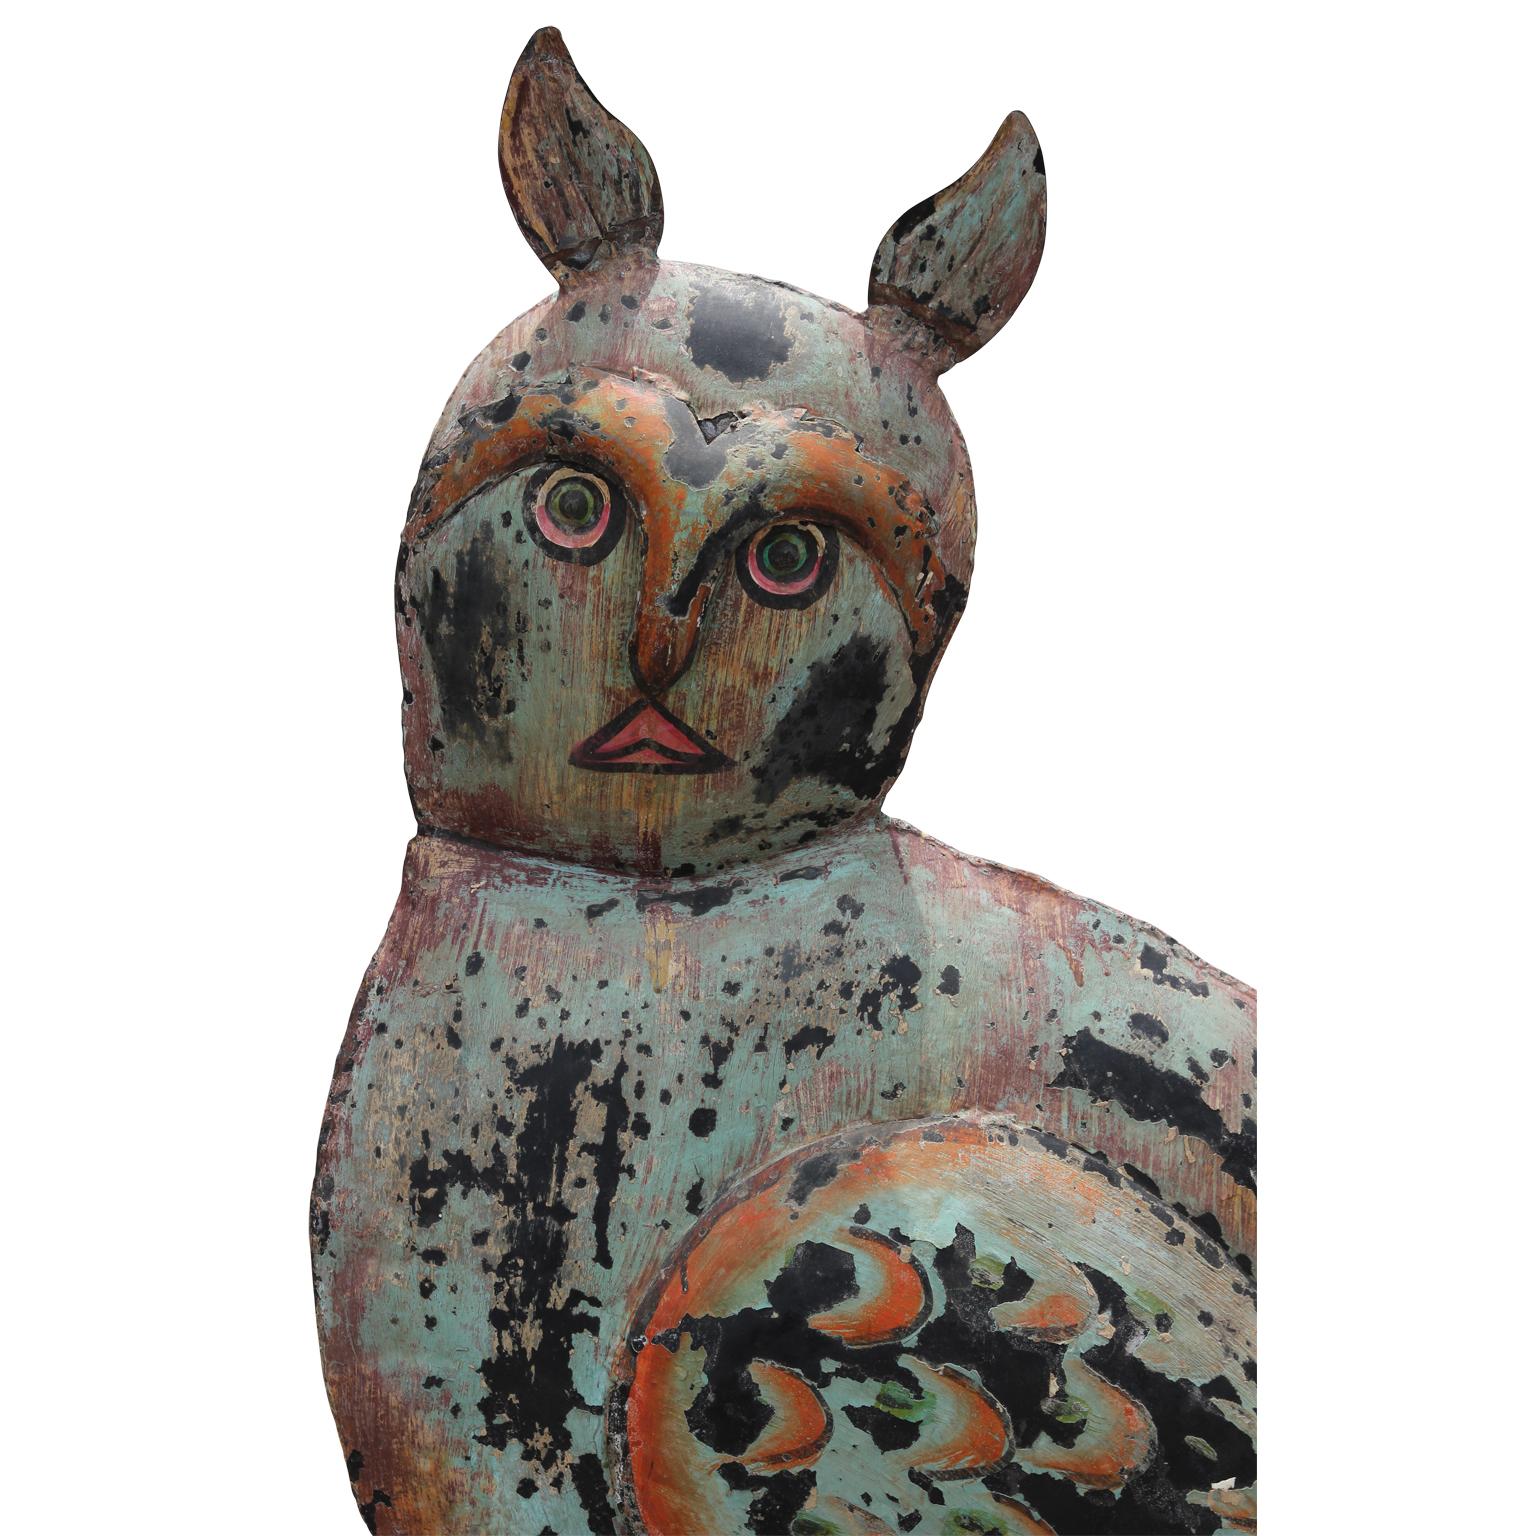 Large scale folk art style tin owl sculpture with a painted patina. Attached to a wooden base to ensure that the sculpture is stable.